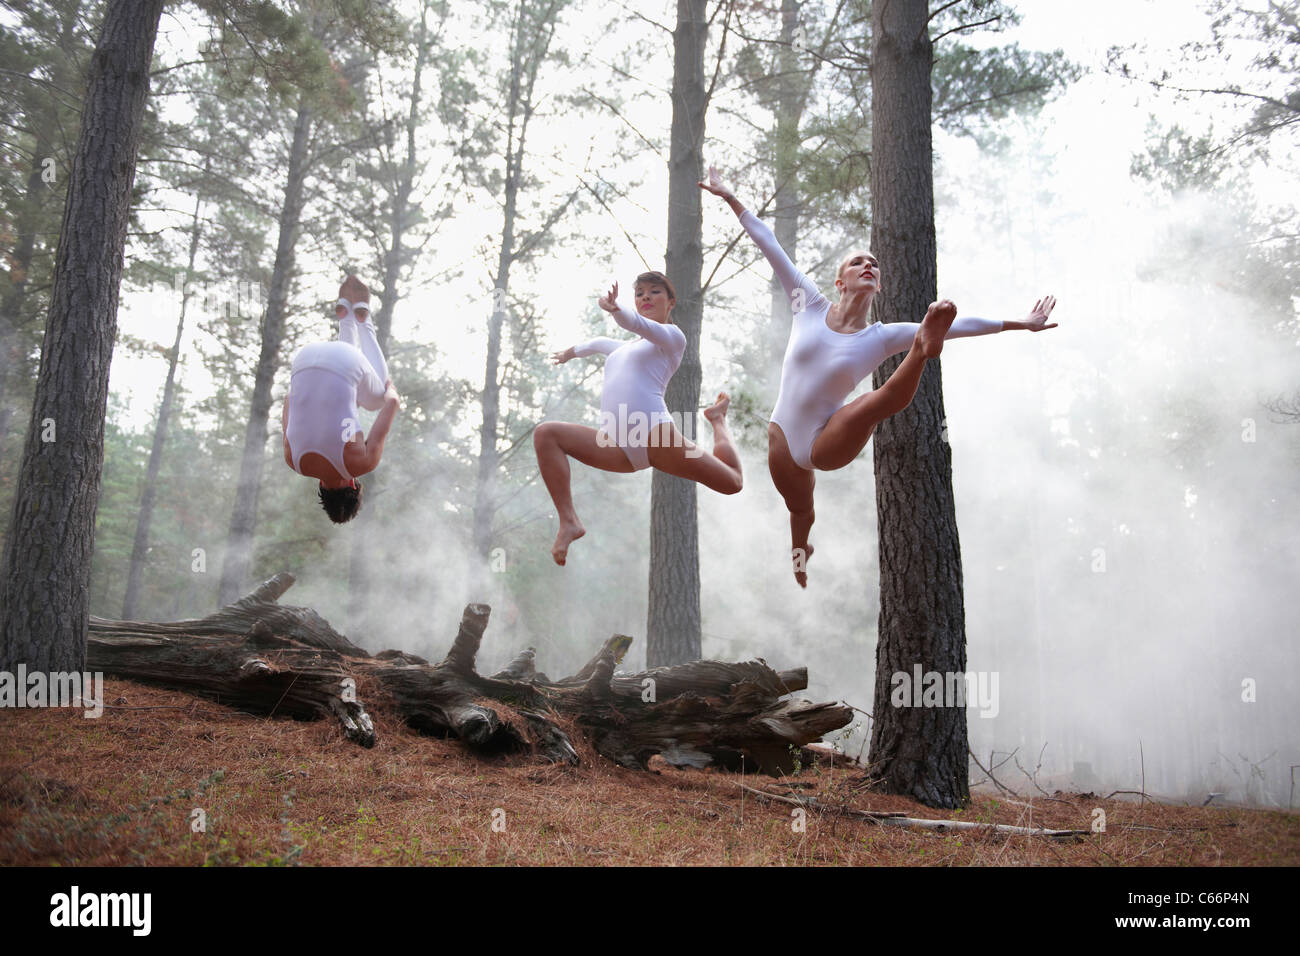 Dancers jumping in forest Stock Photo